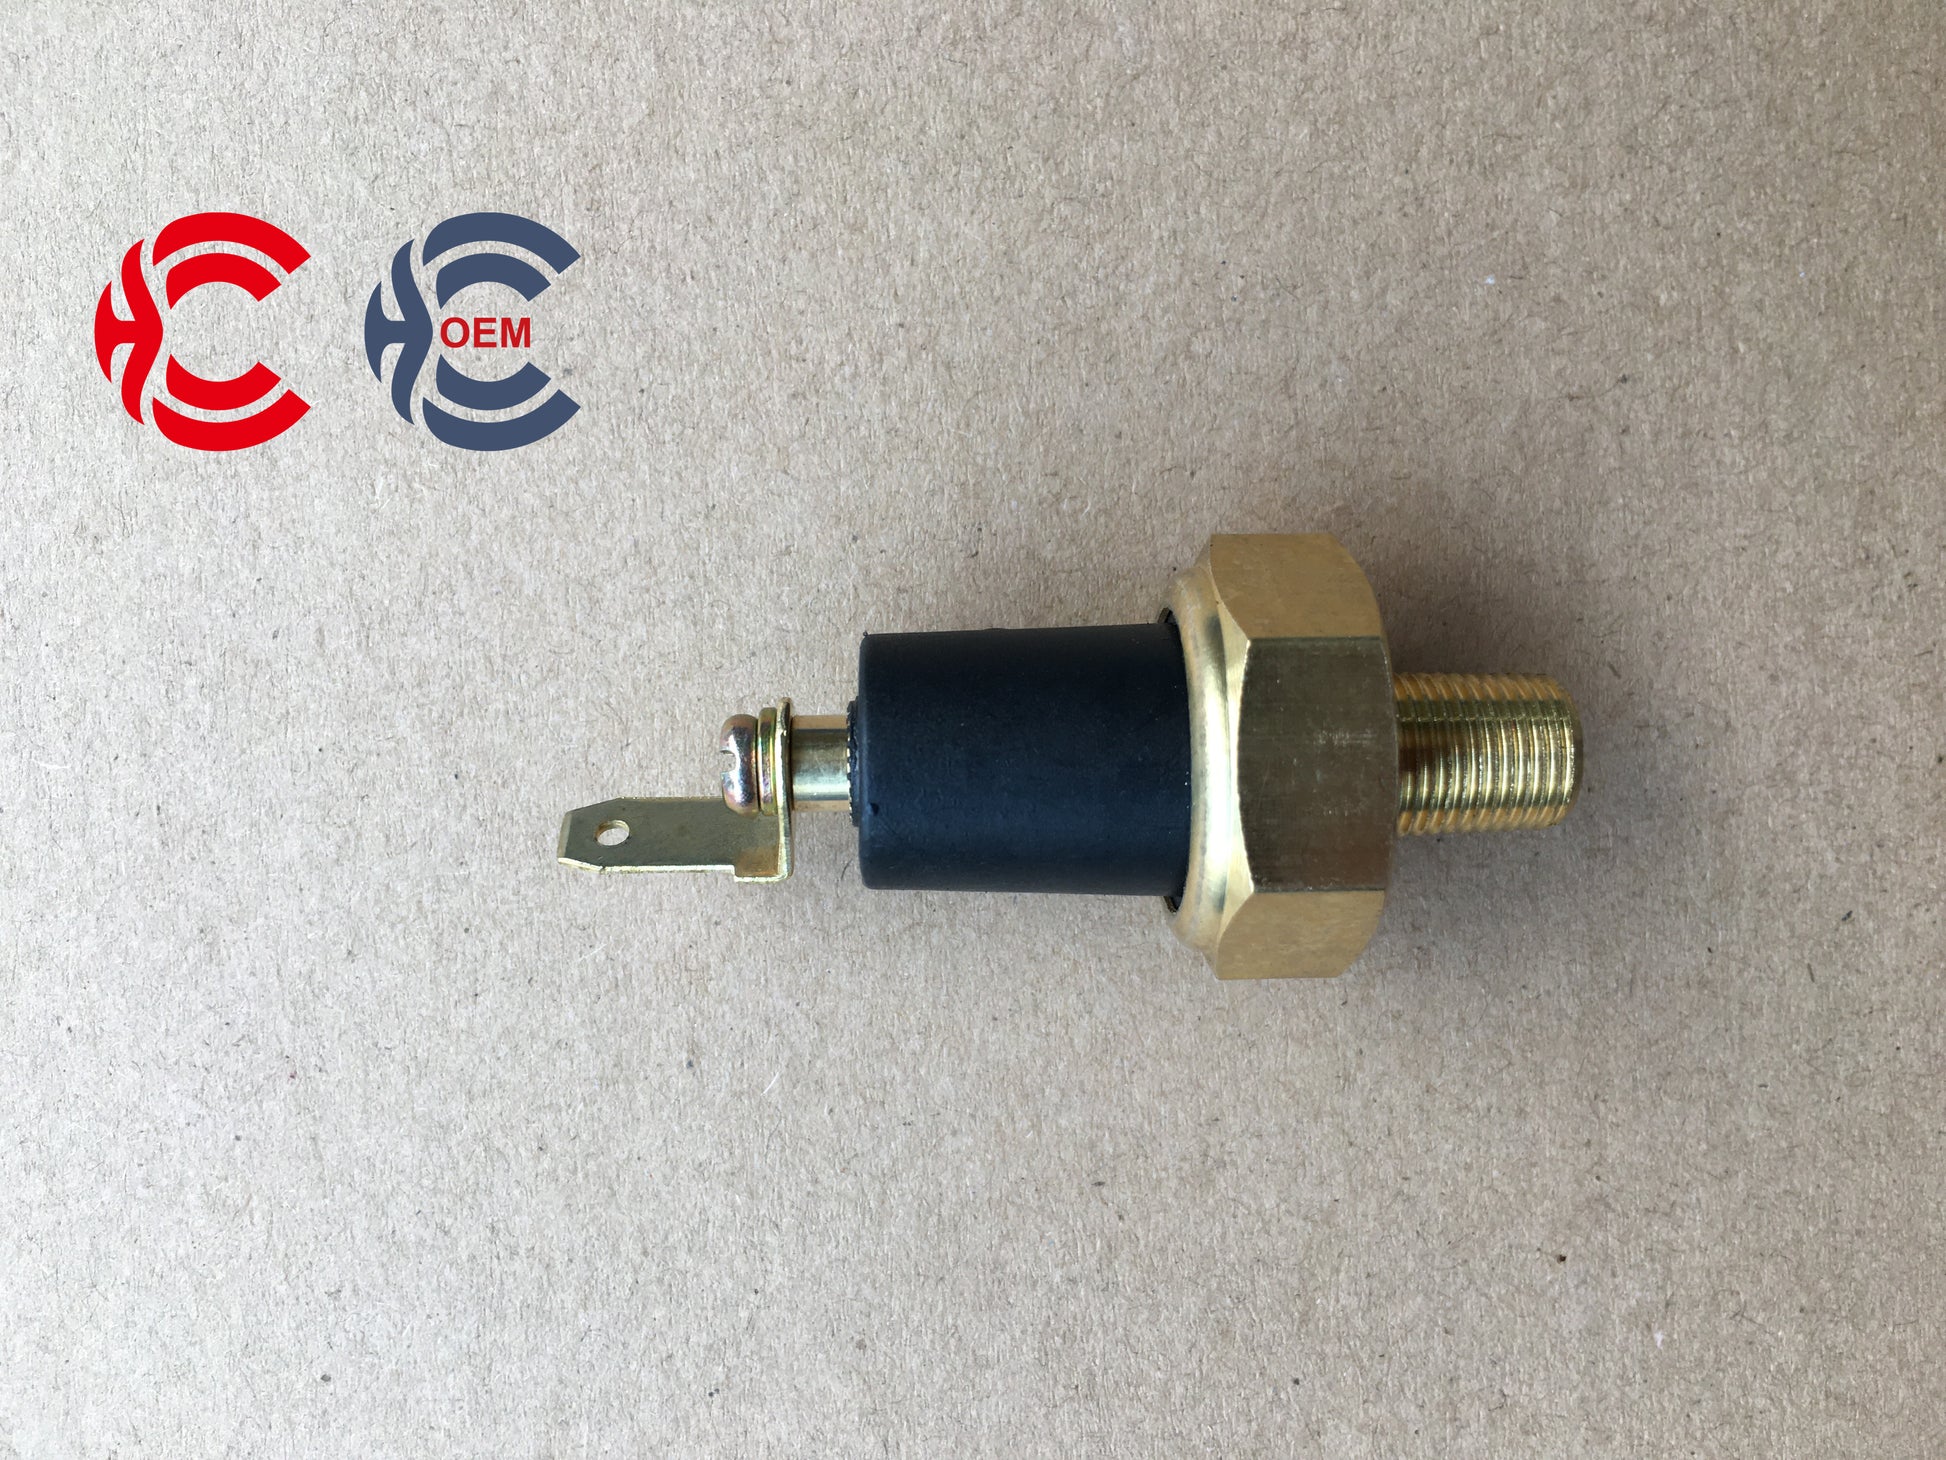 OEM: Material: ABS MetalColor: Black SilverOrigin: Made in ChinaWeight: 50gPacking List: 1* Gas Pressure Switch More ServiceWe can provide OEM Manufacturing serviceWe can Be your one-step solution for Auto PartsWe can provide technical scheme for you Feel Free to Contact Us, We will get back to you as soon as possible.